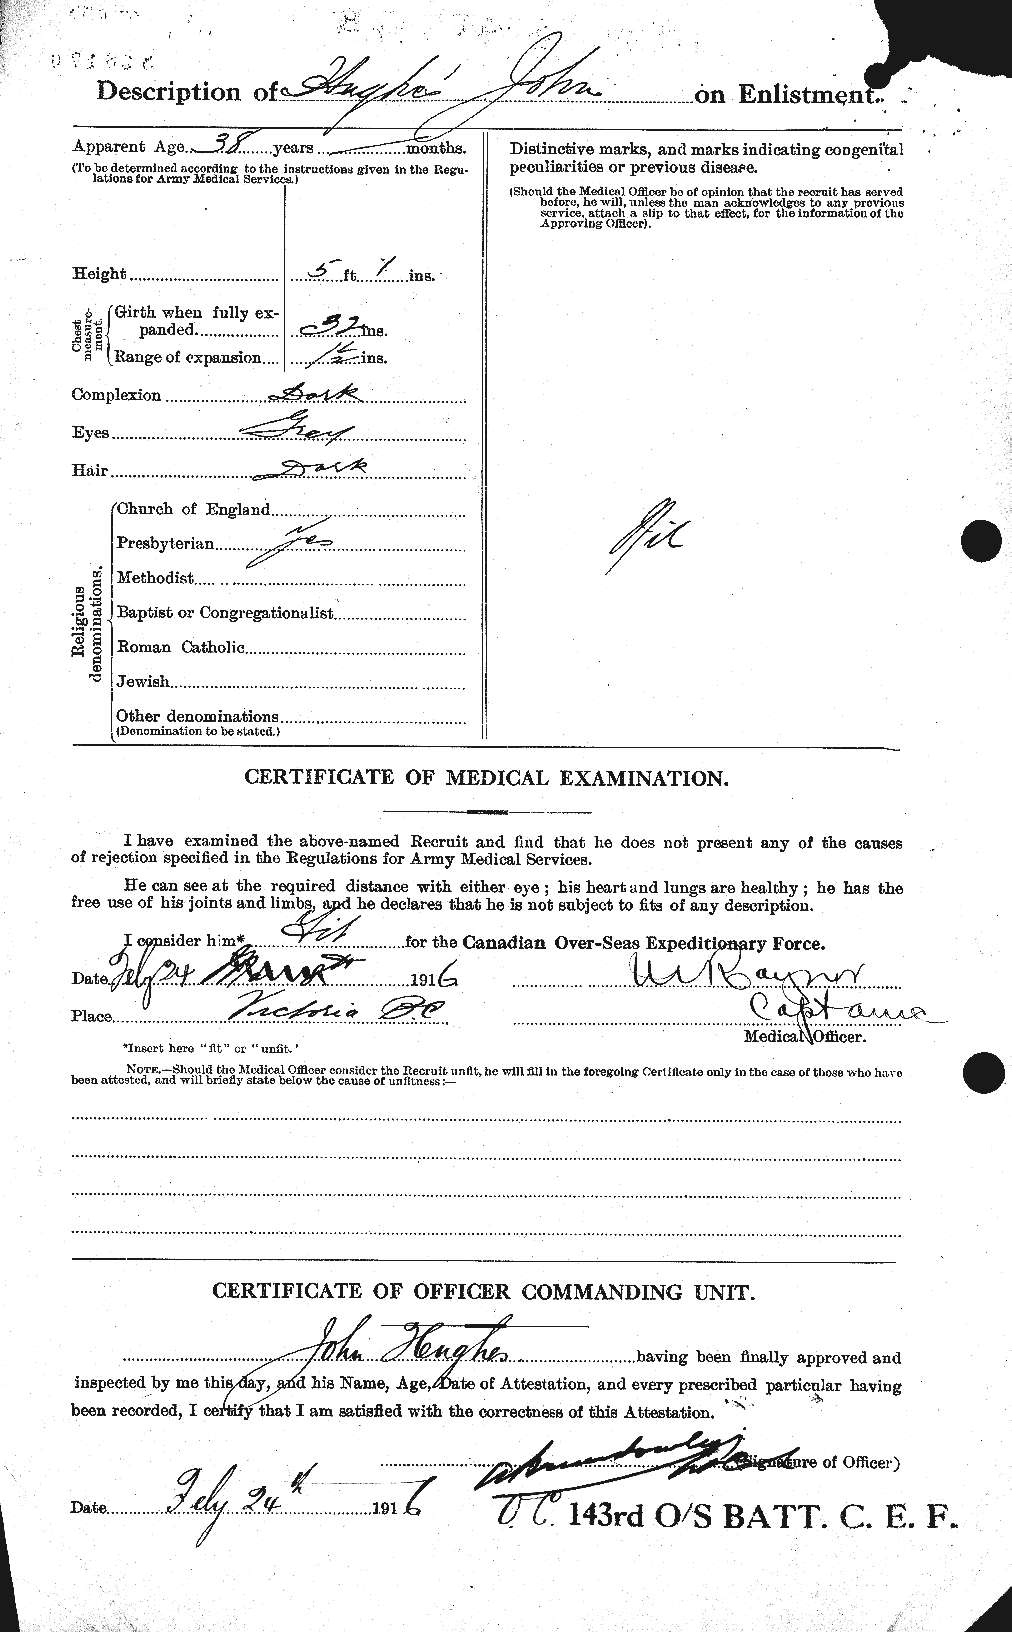 Personnel Records of the First World War - CEF 403981b